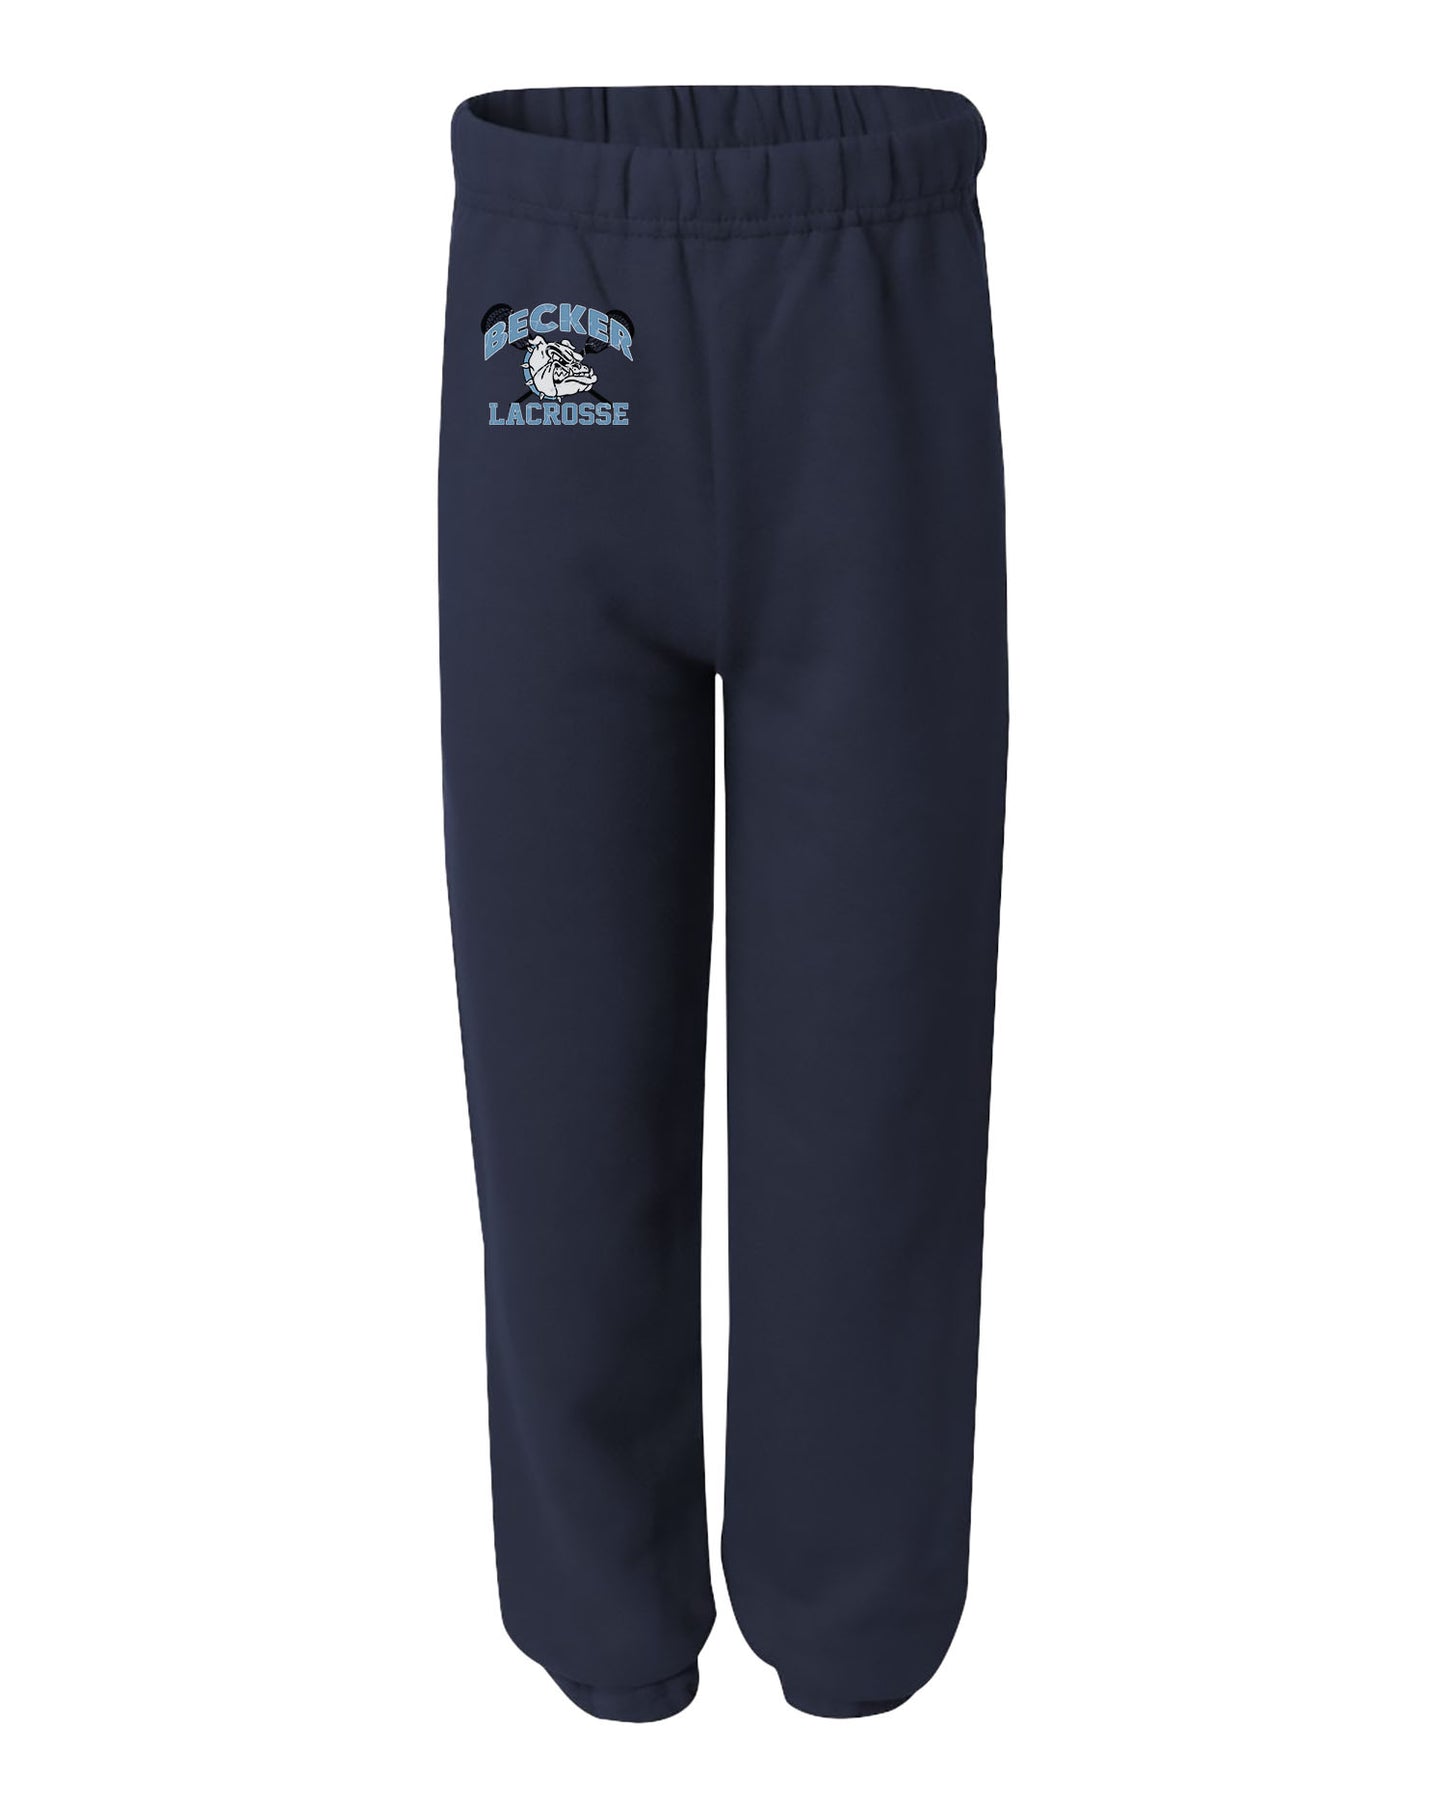 Becker Lacrosse // Youth Joggers